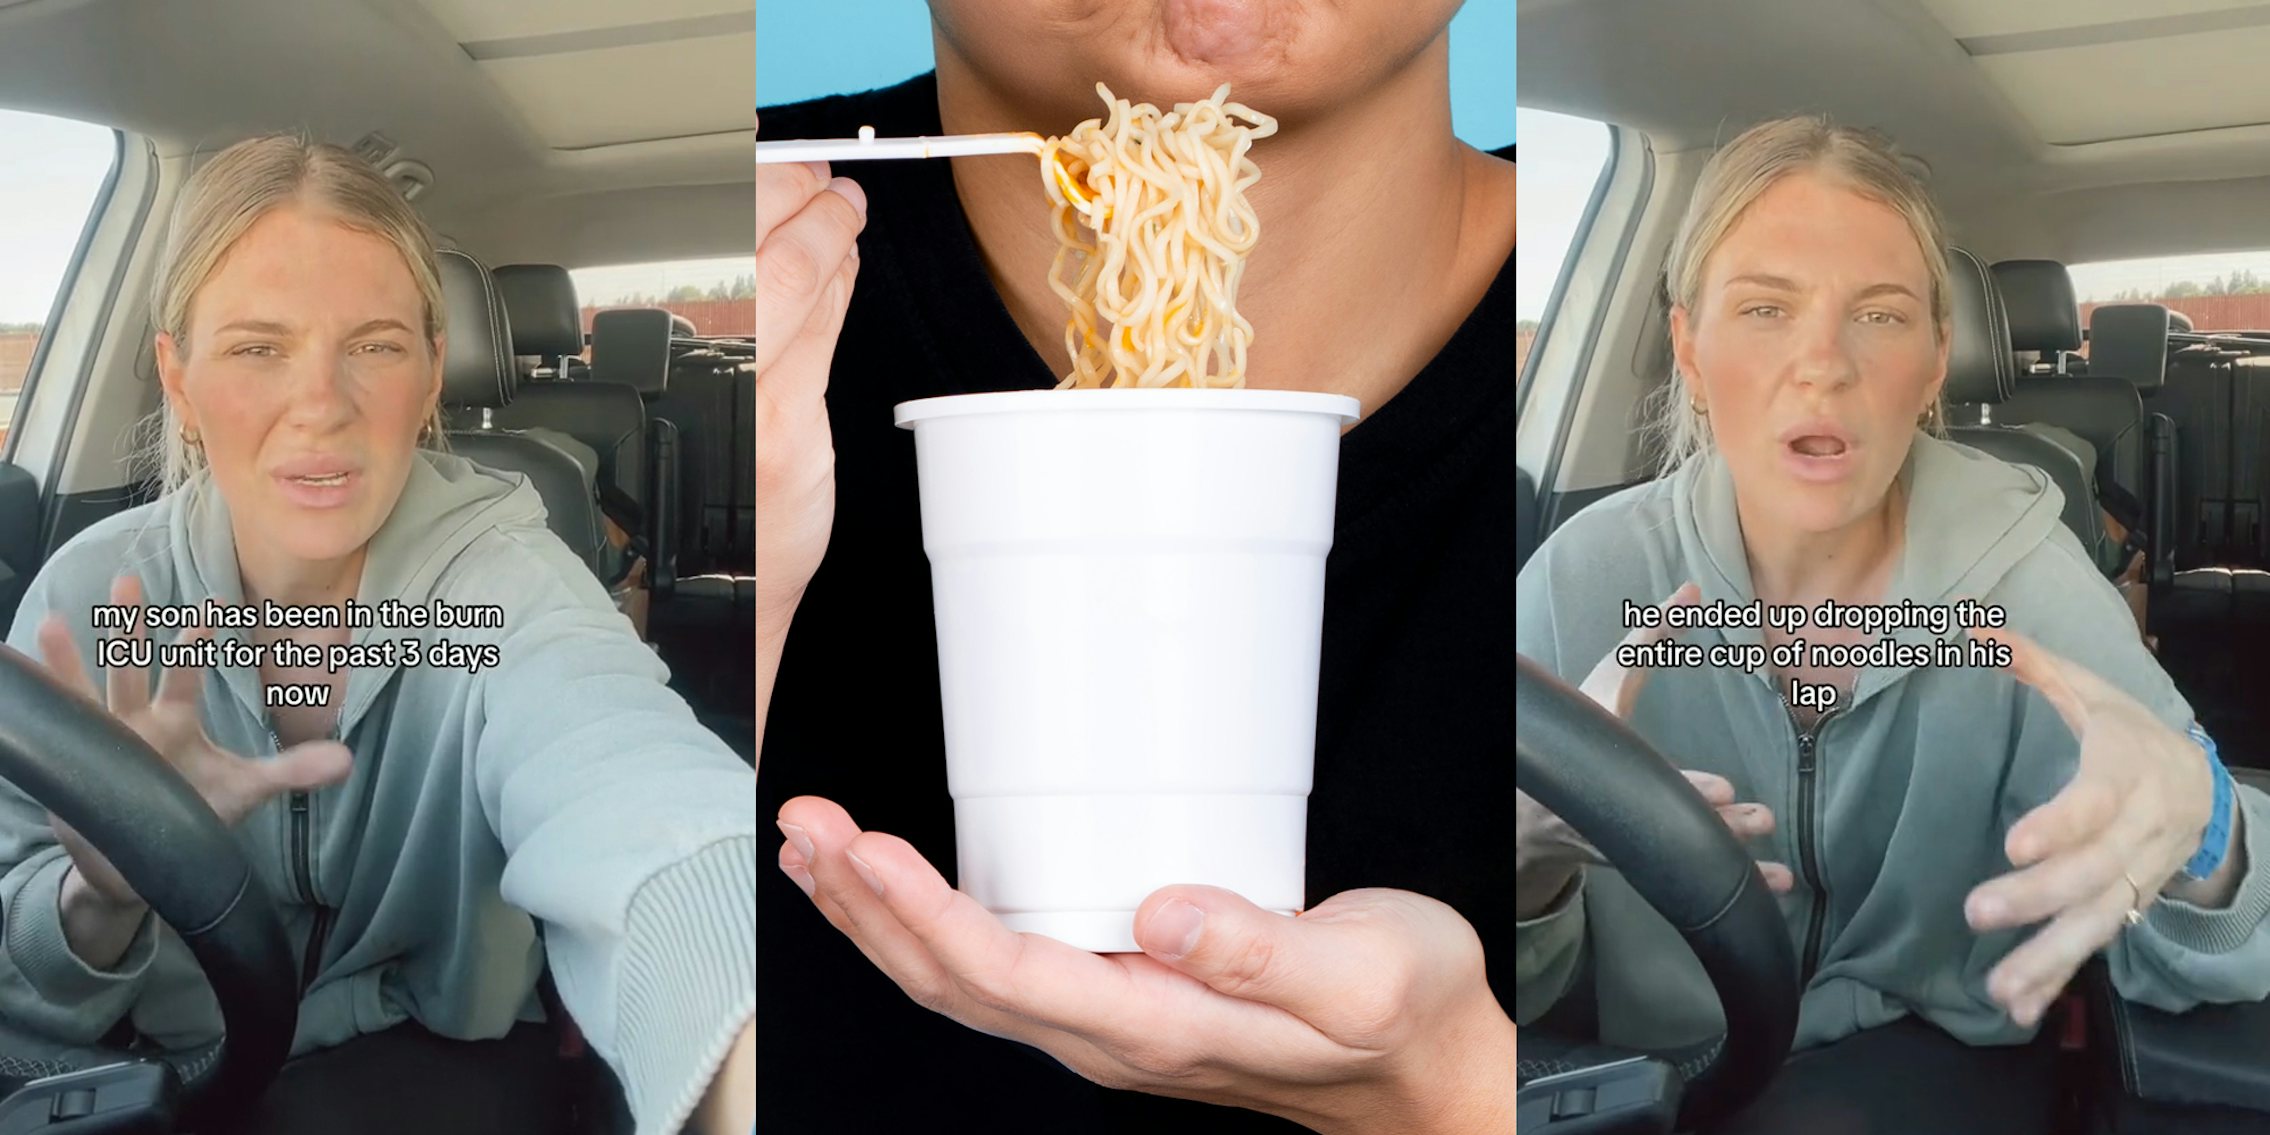 woman speaking in car with caption 'my son has been in the burn ICU unit for the past 3 days now' (l) boy eating cup of noodles in front of blue background (c) woman speaking in car with caption 'he ended dropping the entire cup of noodles in his lap' (r)